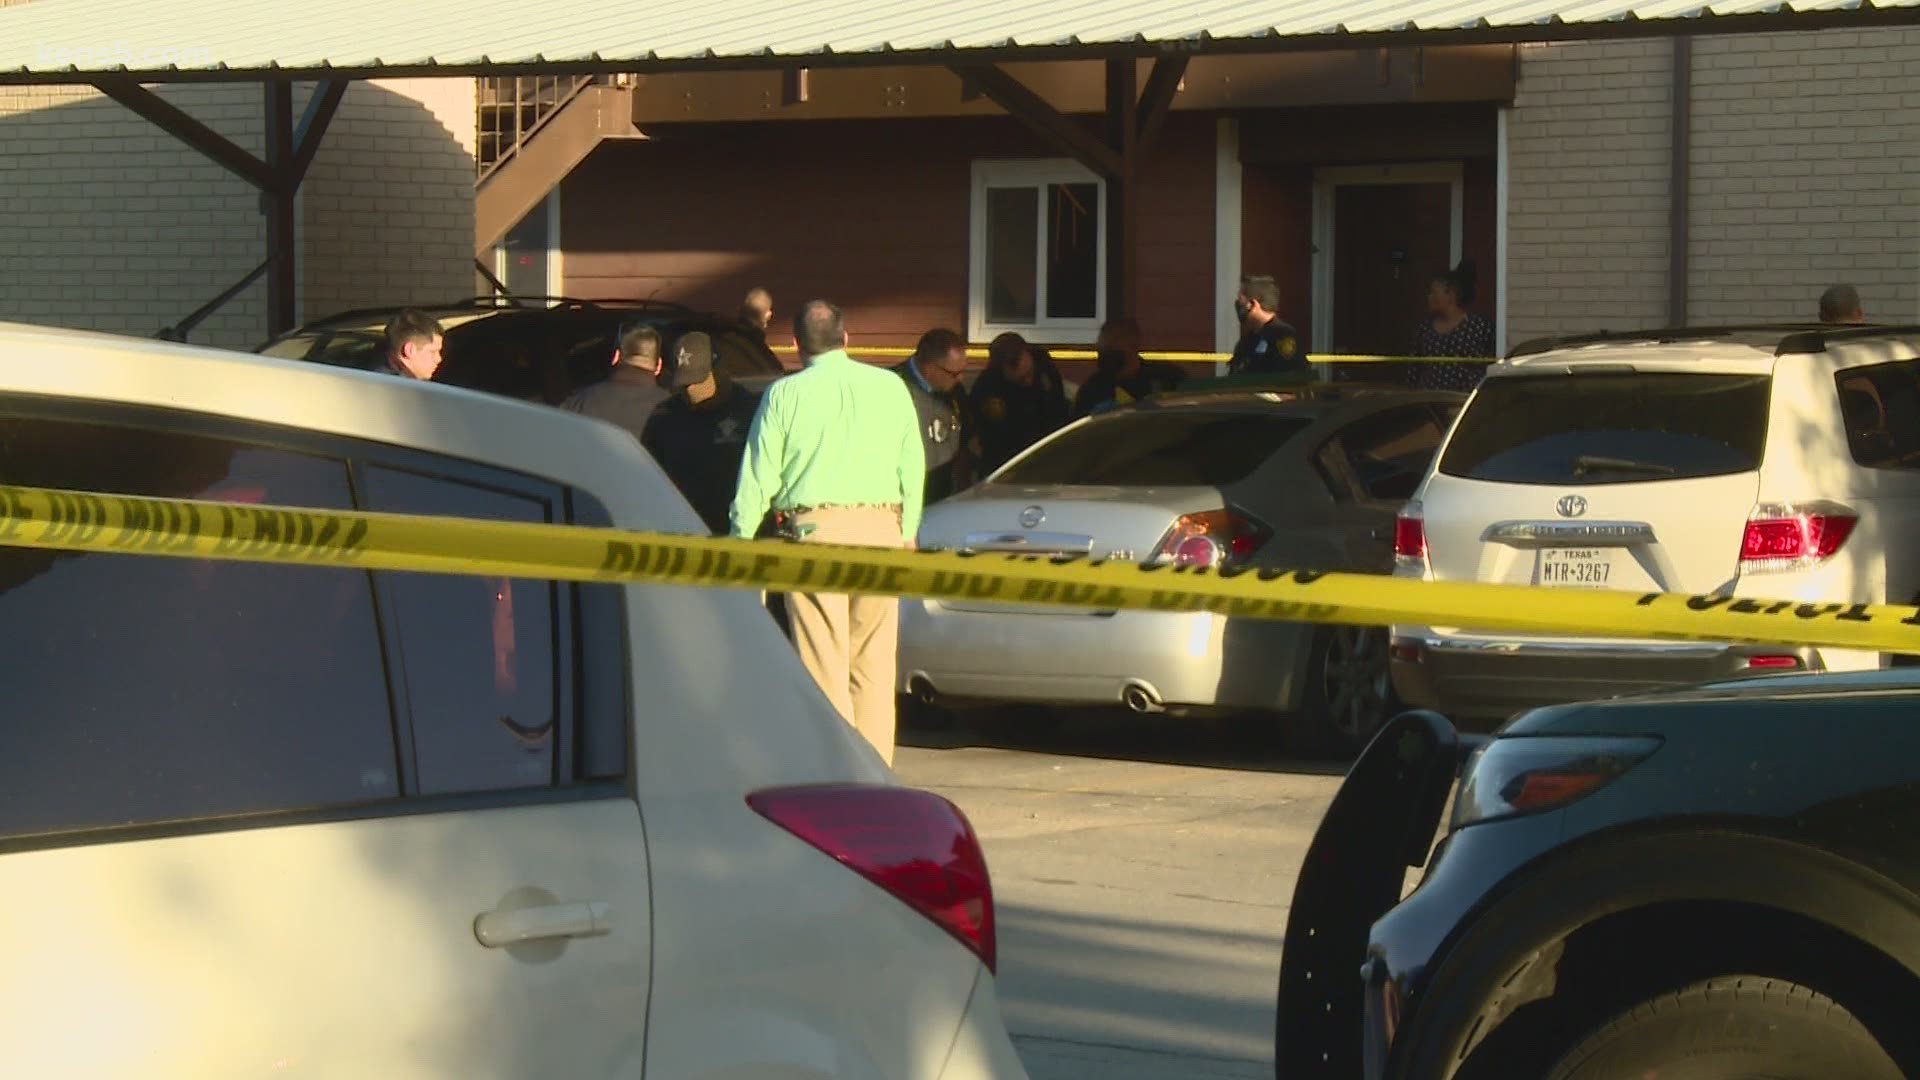 Authorities say the shooting unfolded Wednesday on the city's northeast side.